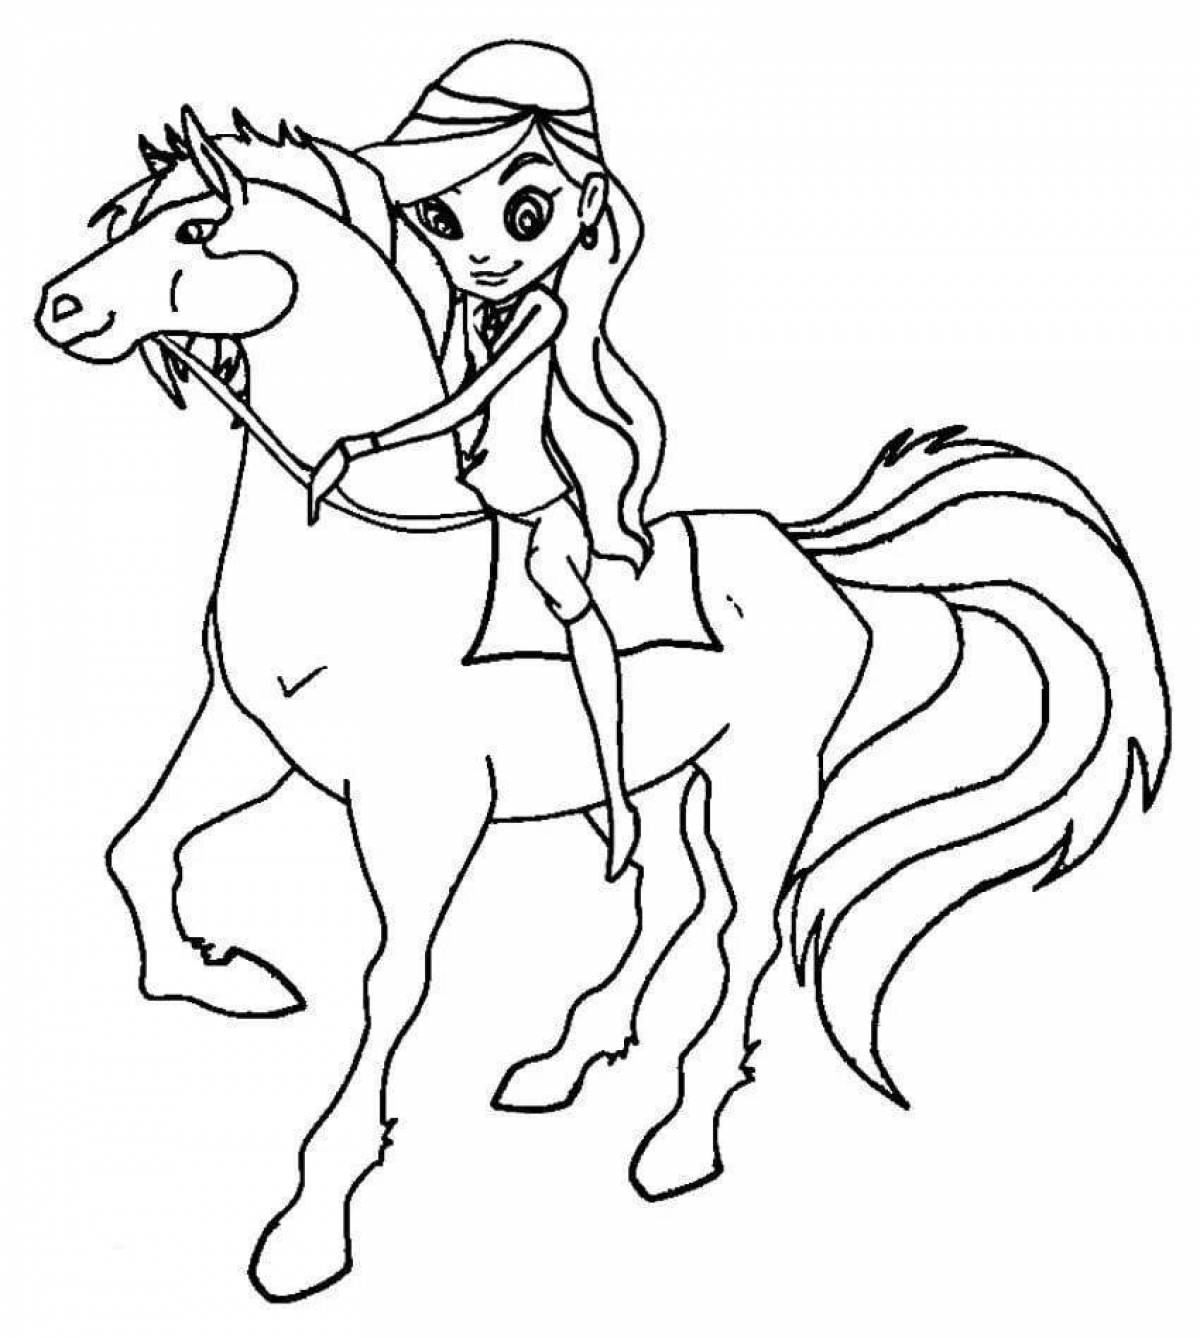 Coloring page bright country of horses